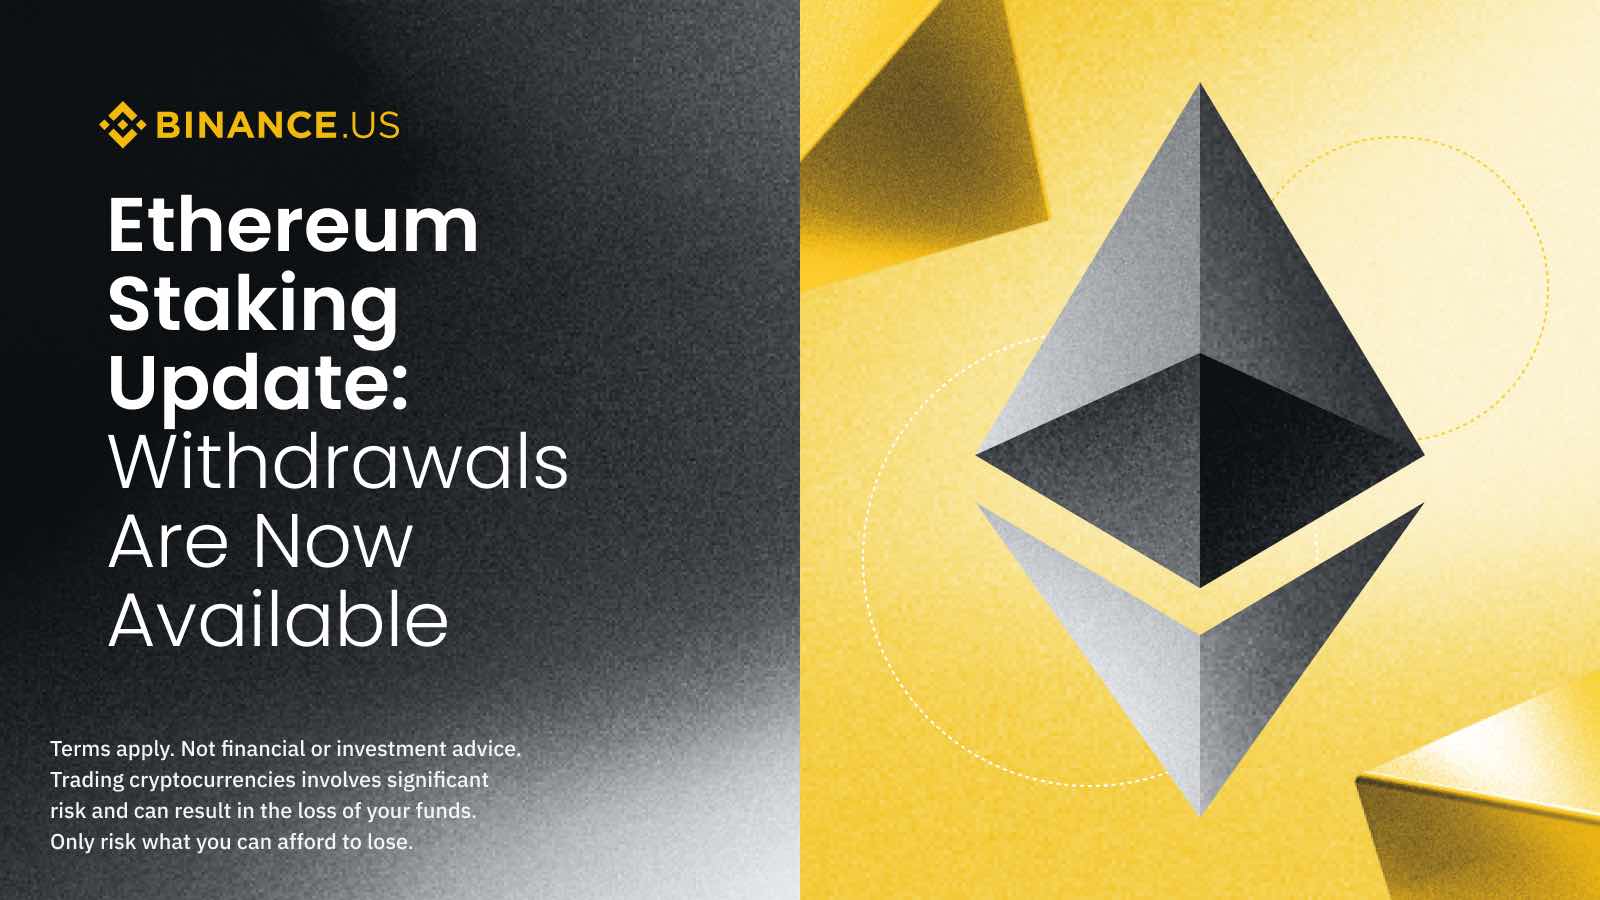 Ethereum Unstaking & Withdrawals Are Now Available on Binance.US